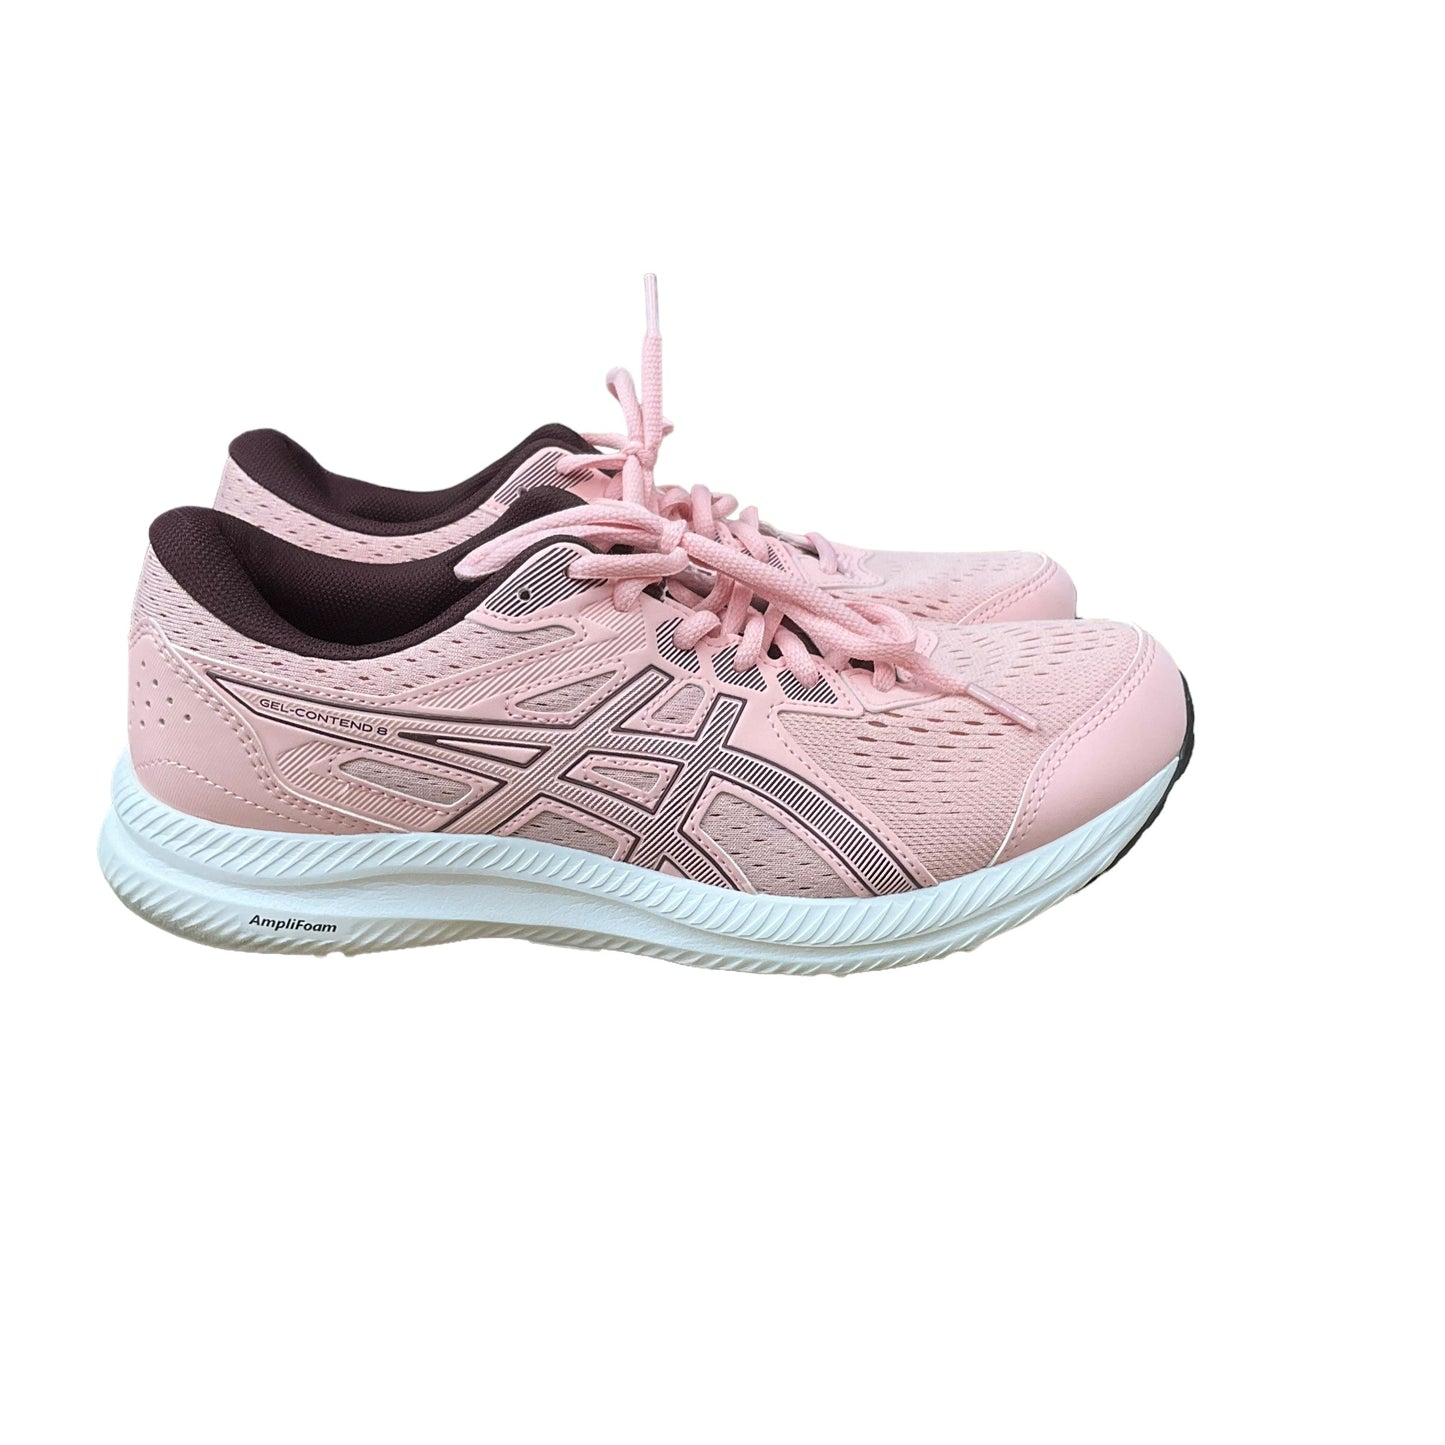 Pink Shoes Athletic Asics, Size 10